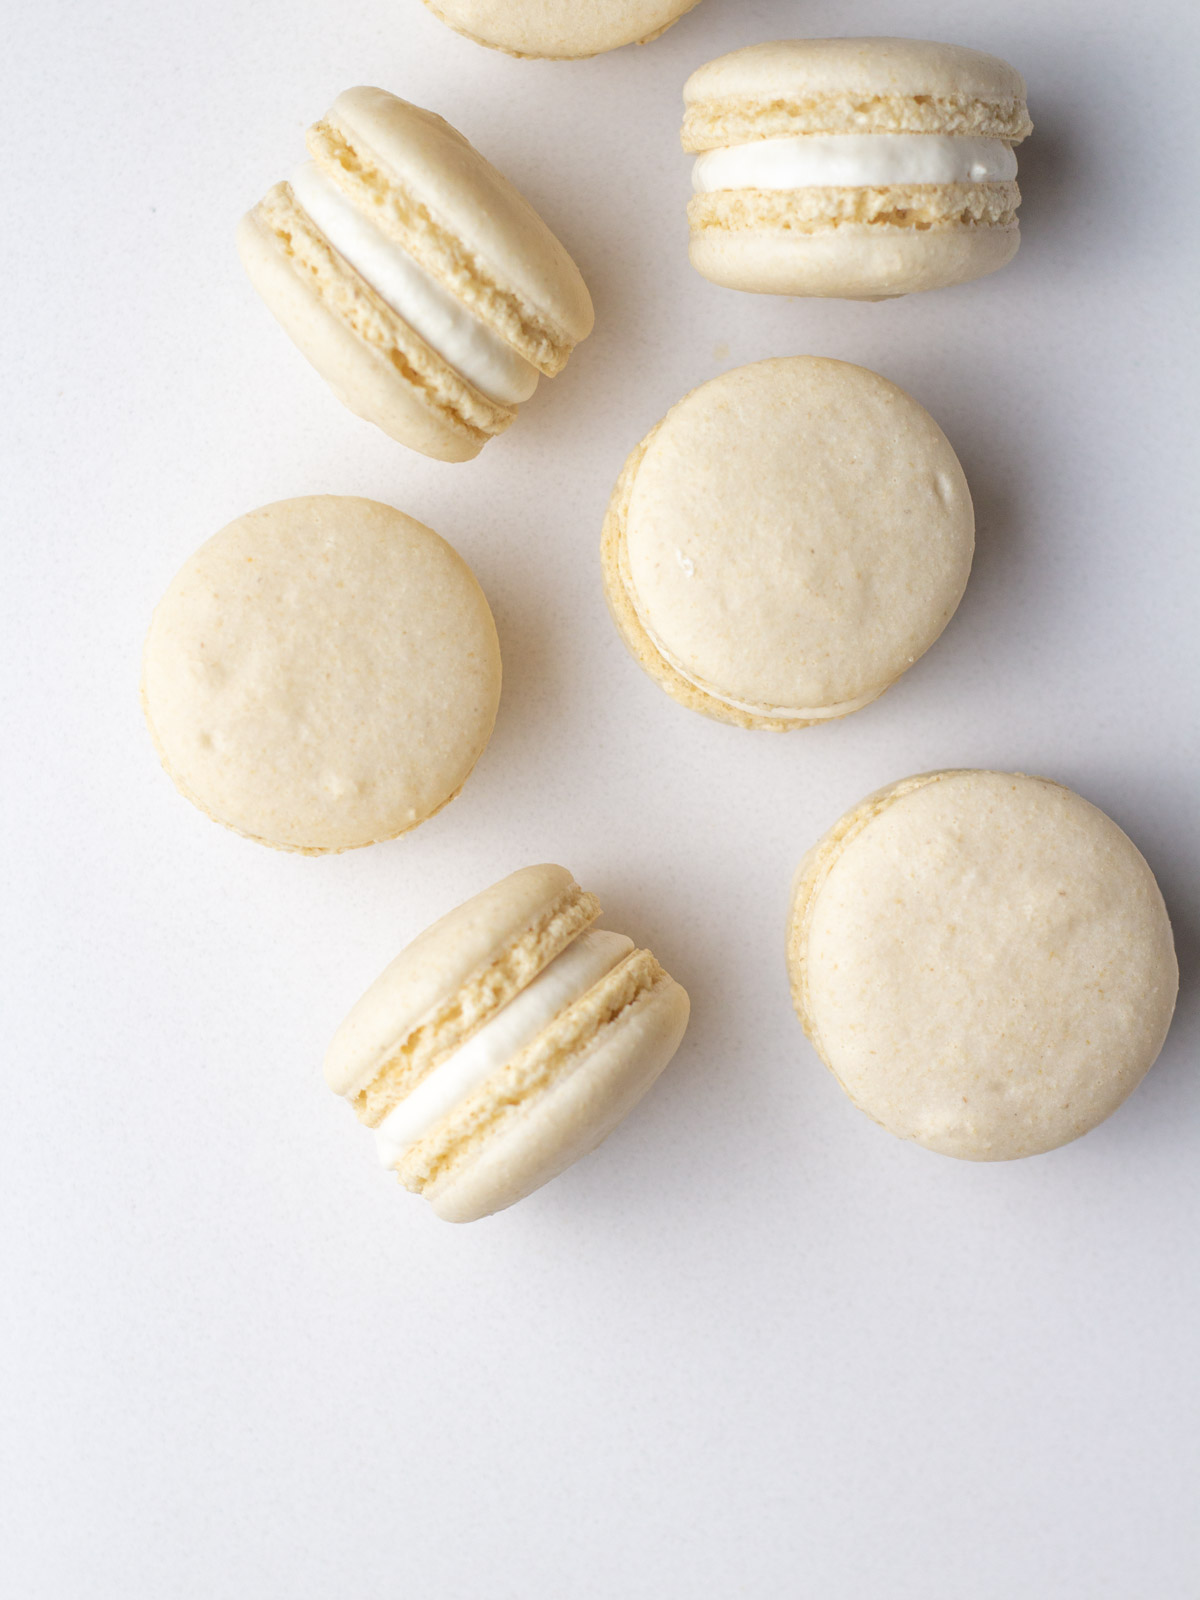 Nut-free oat flour macarons coming into the frame from the top right corner, some on their sides.